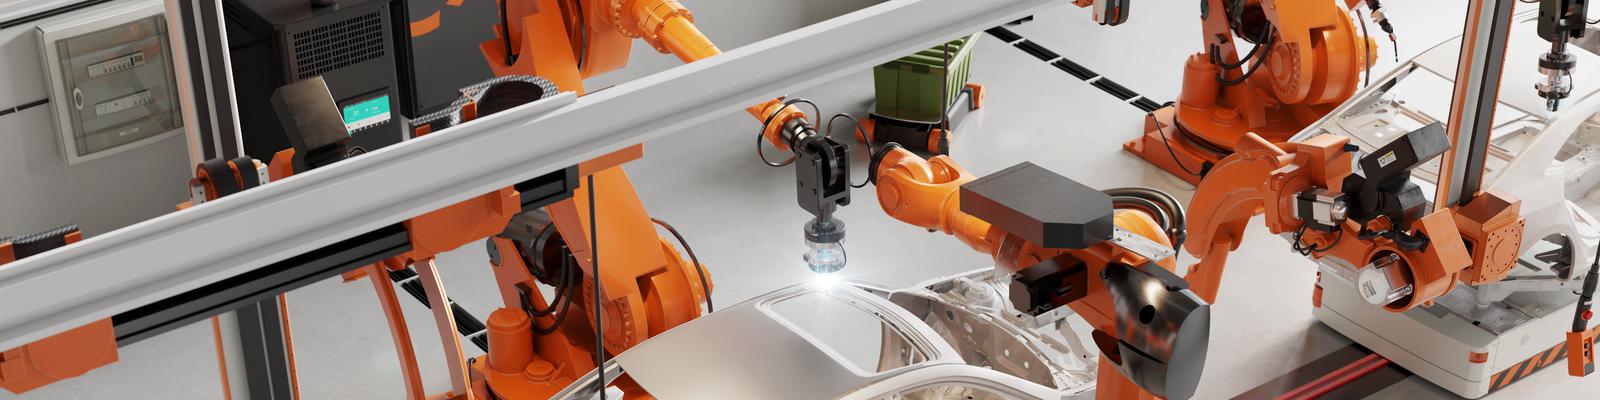 High angle view of car body welding shop with robotic arms welding the car parts. 3d rendering of automatic car manufacturing line in an automobile factory.